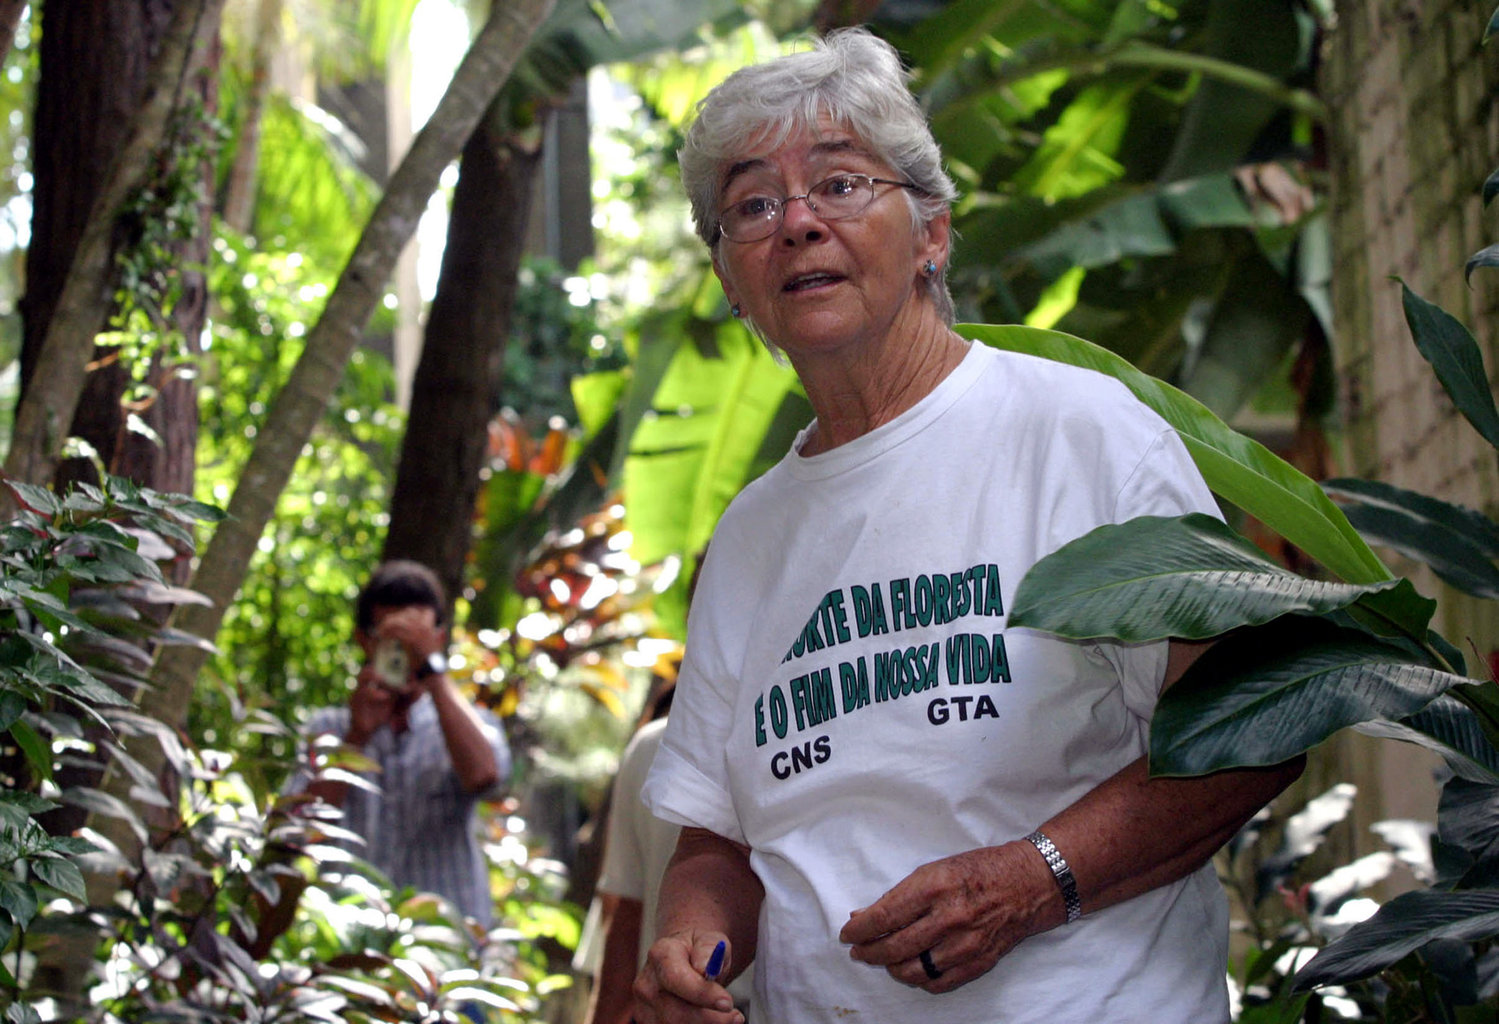 U.S.-born Sister Dorothy Stang, a member of the Sisters of Notre Dame de Namur, is pictured in a 2004 file photo in Belem, northern Brazil. The nun was 73 when she was murdered Feb. 12, 2005, on an isolated road near the Brazilian town of Anapu. She had lived in the country for nearly four decades and was known as a fierce defender of a sustainable development project for the Amazon forest.